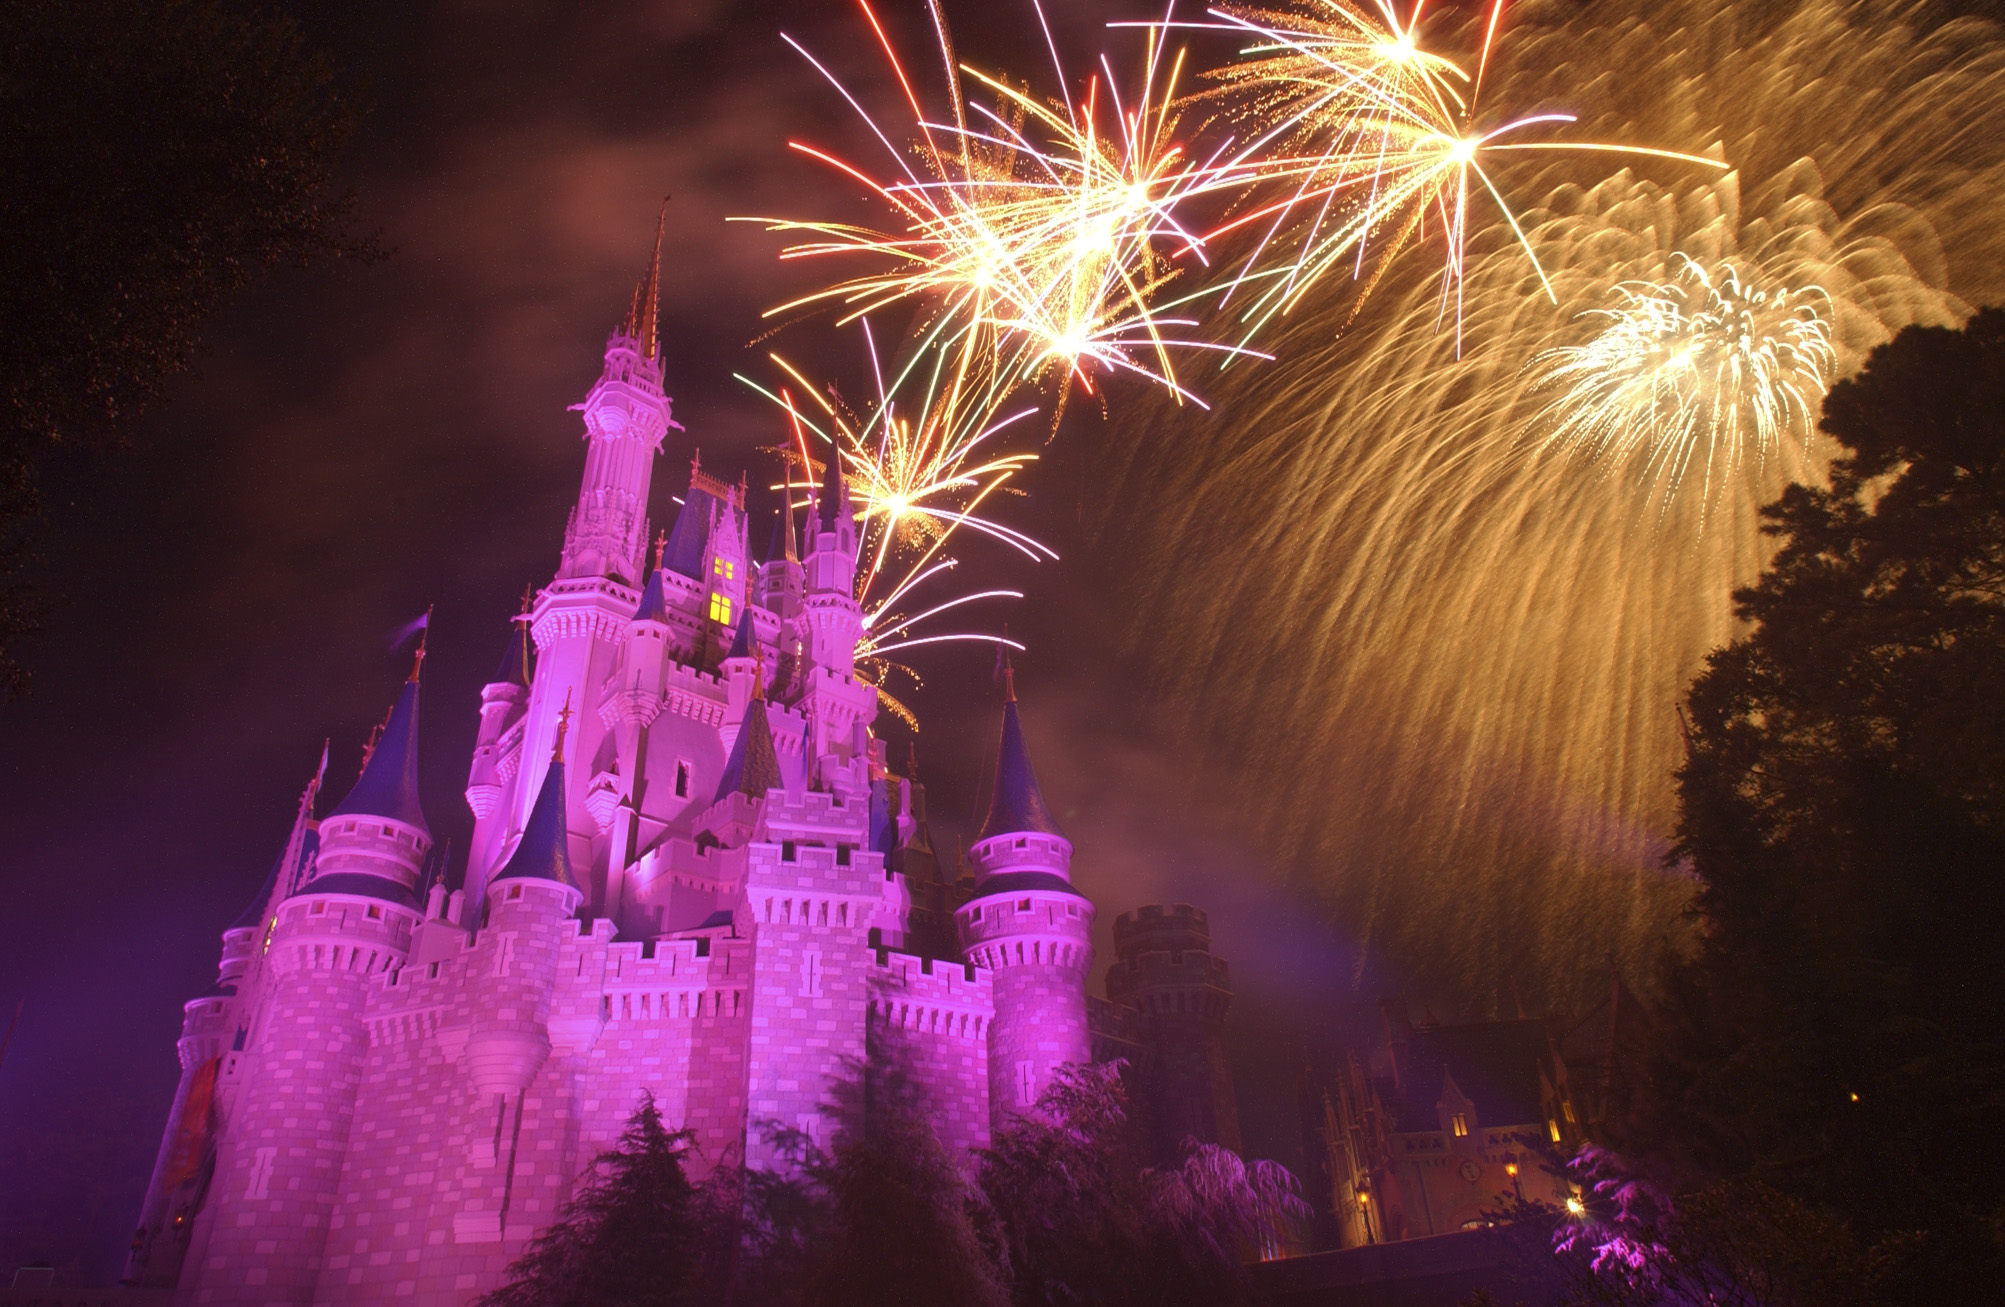   Disney’s Magical Experience!    Have an adventure in the Magical Kingdom  